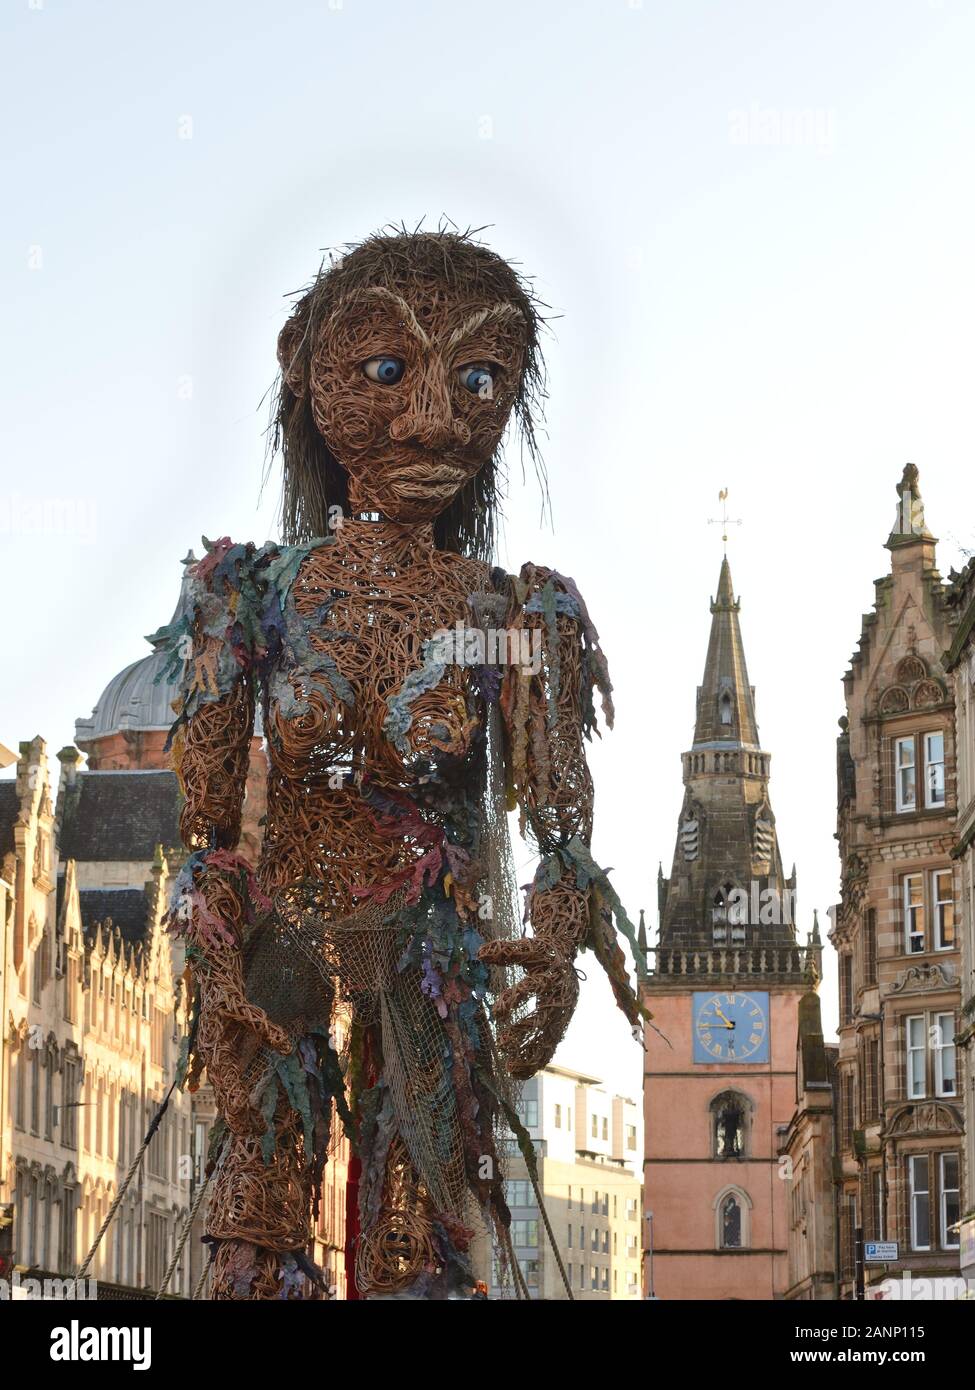 18th, January, 2020. Glasgow, Scotland, UK. 10m tall animated puppet called Storm walks through the city centre to mark the beginning of Coastal Connections part of a climate event taking place in the city. Stock Photo